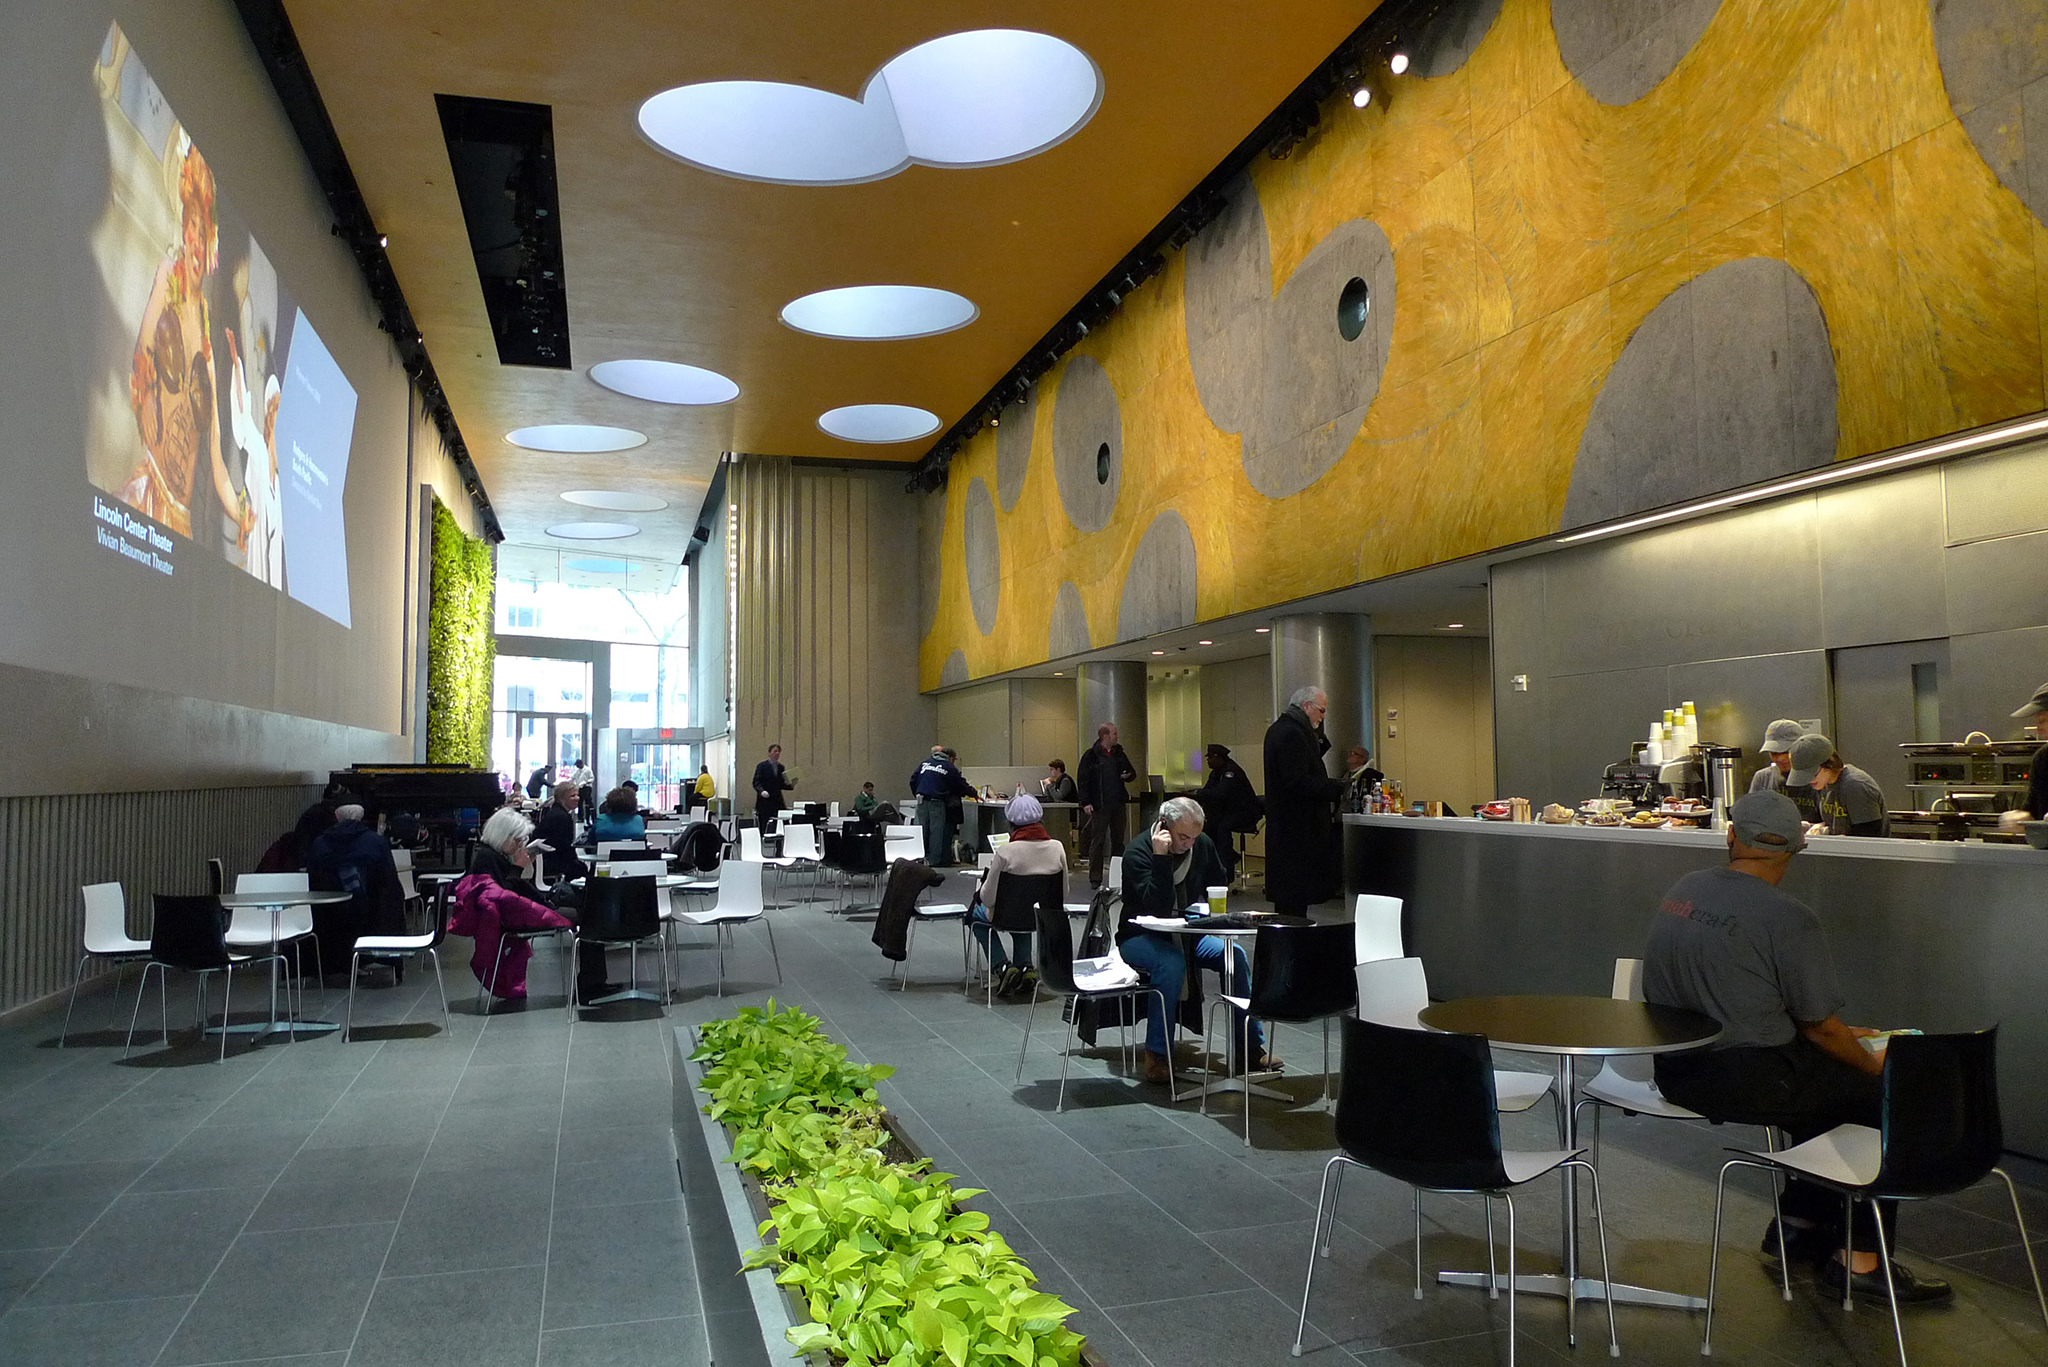 David Rubenstein Atrium (at Lincoln Center) | Things to do in Upper